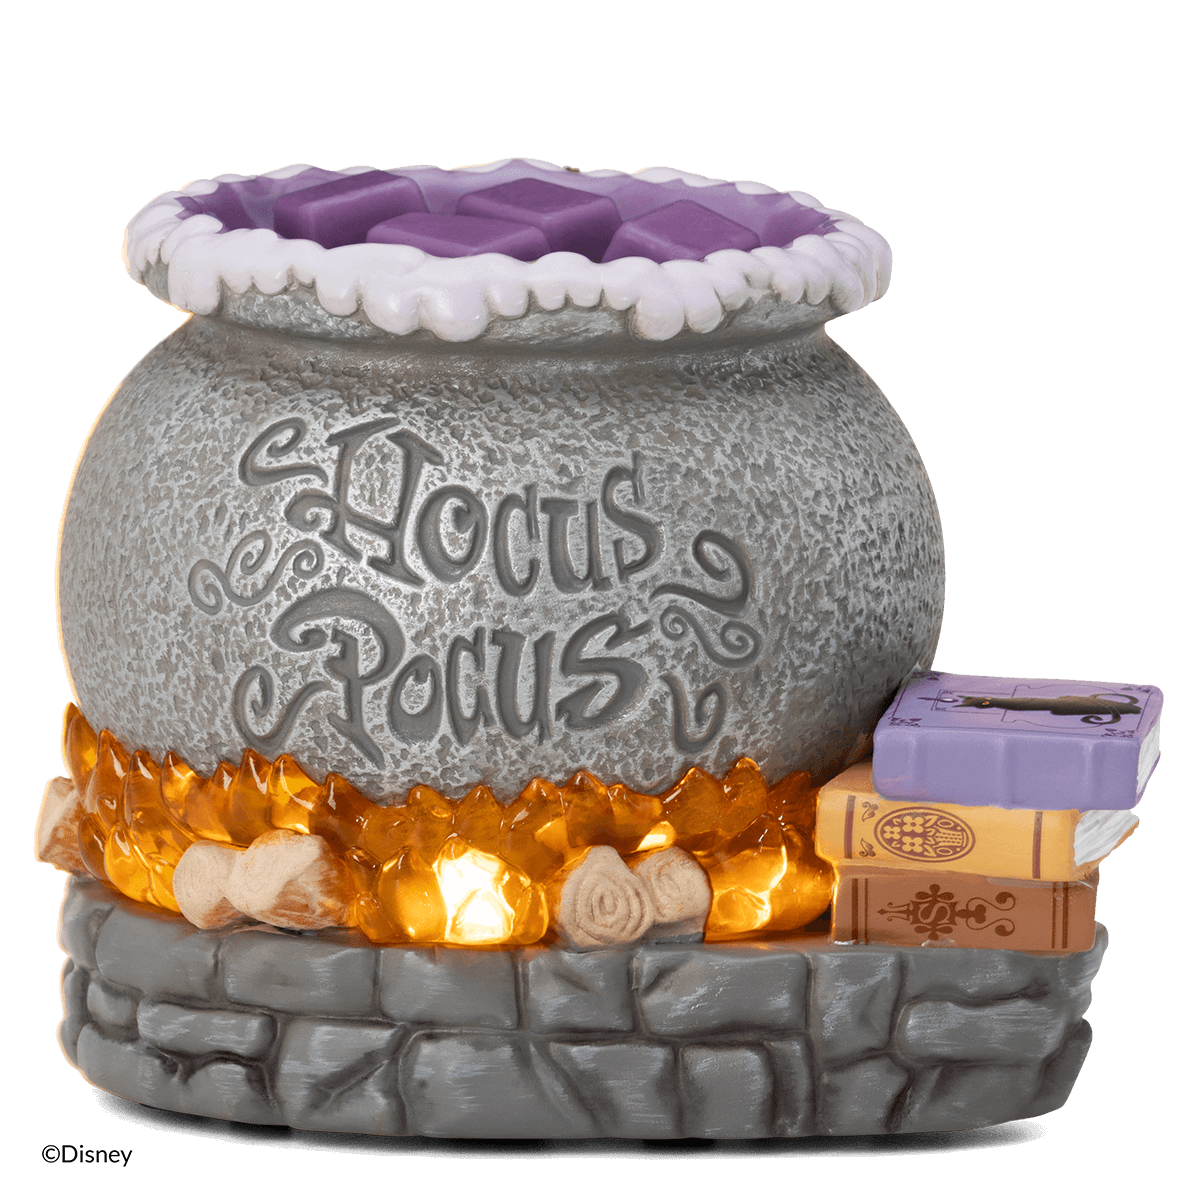 Hocus Pocus Scentsy Collection is Perfectly Wicked! home